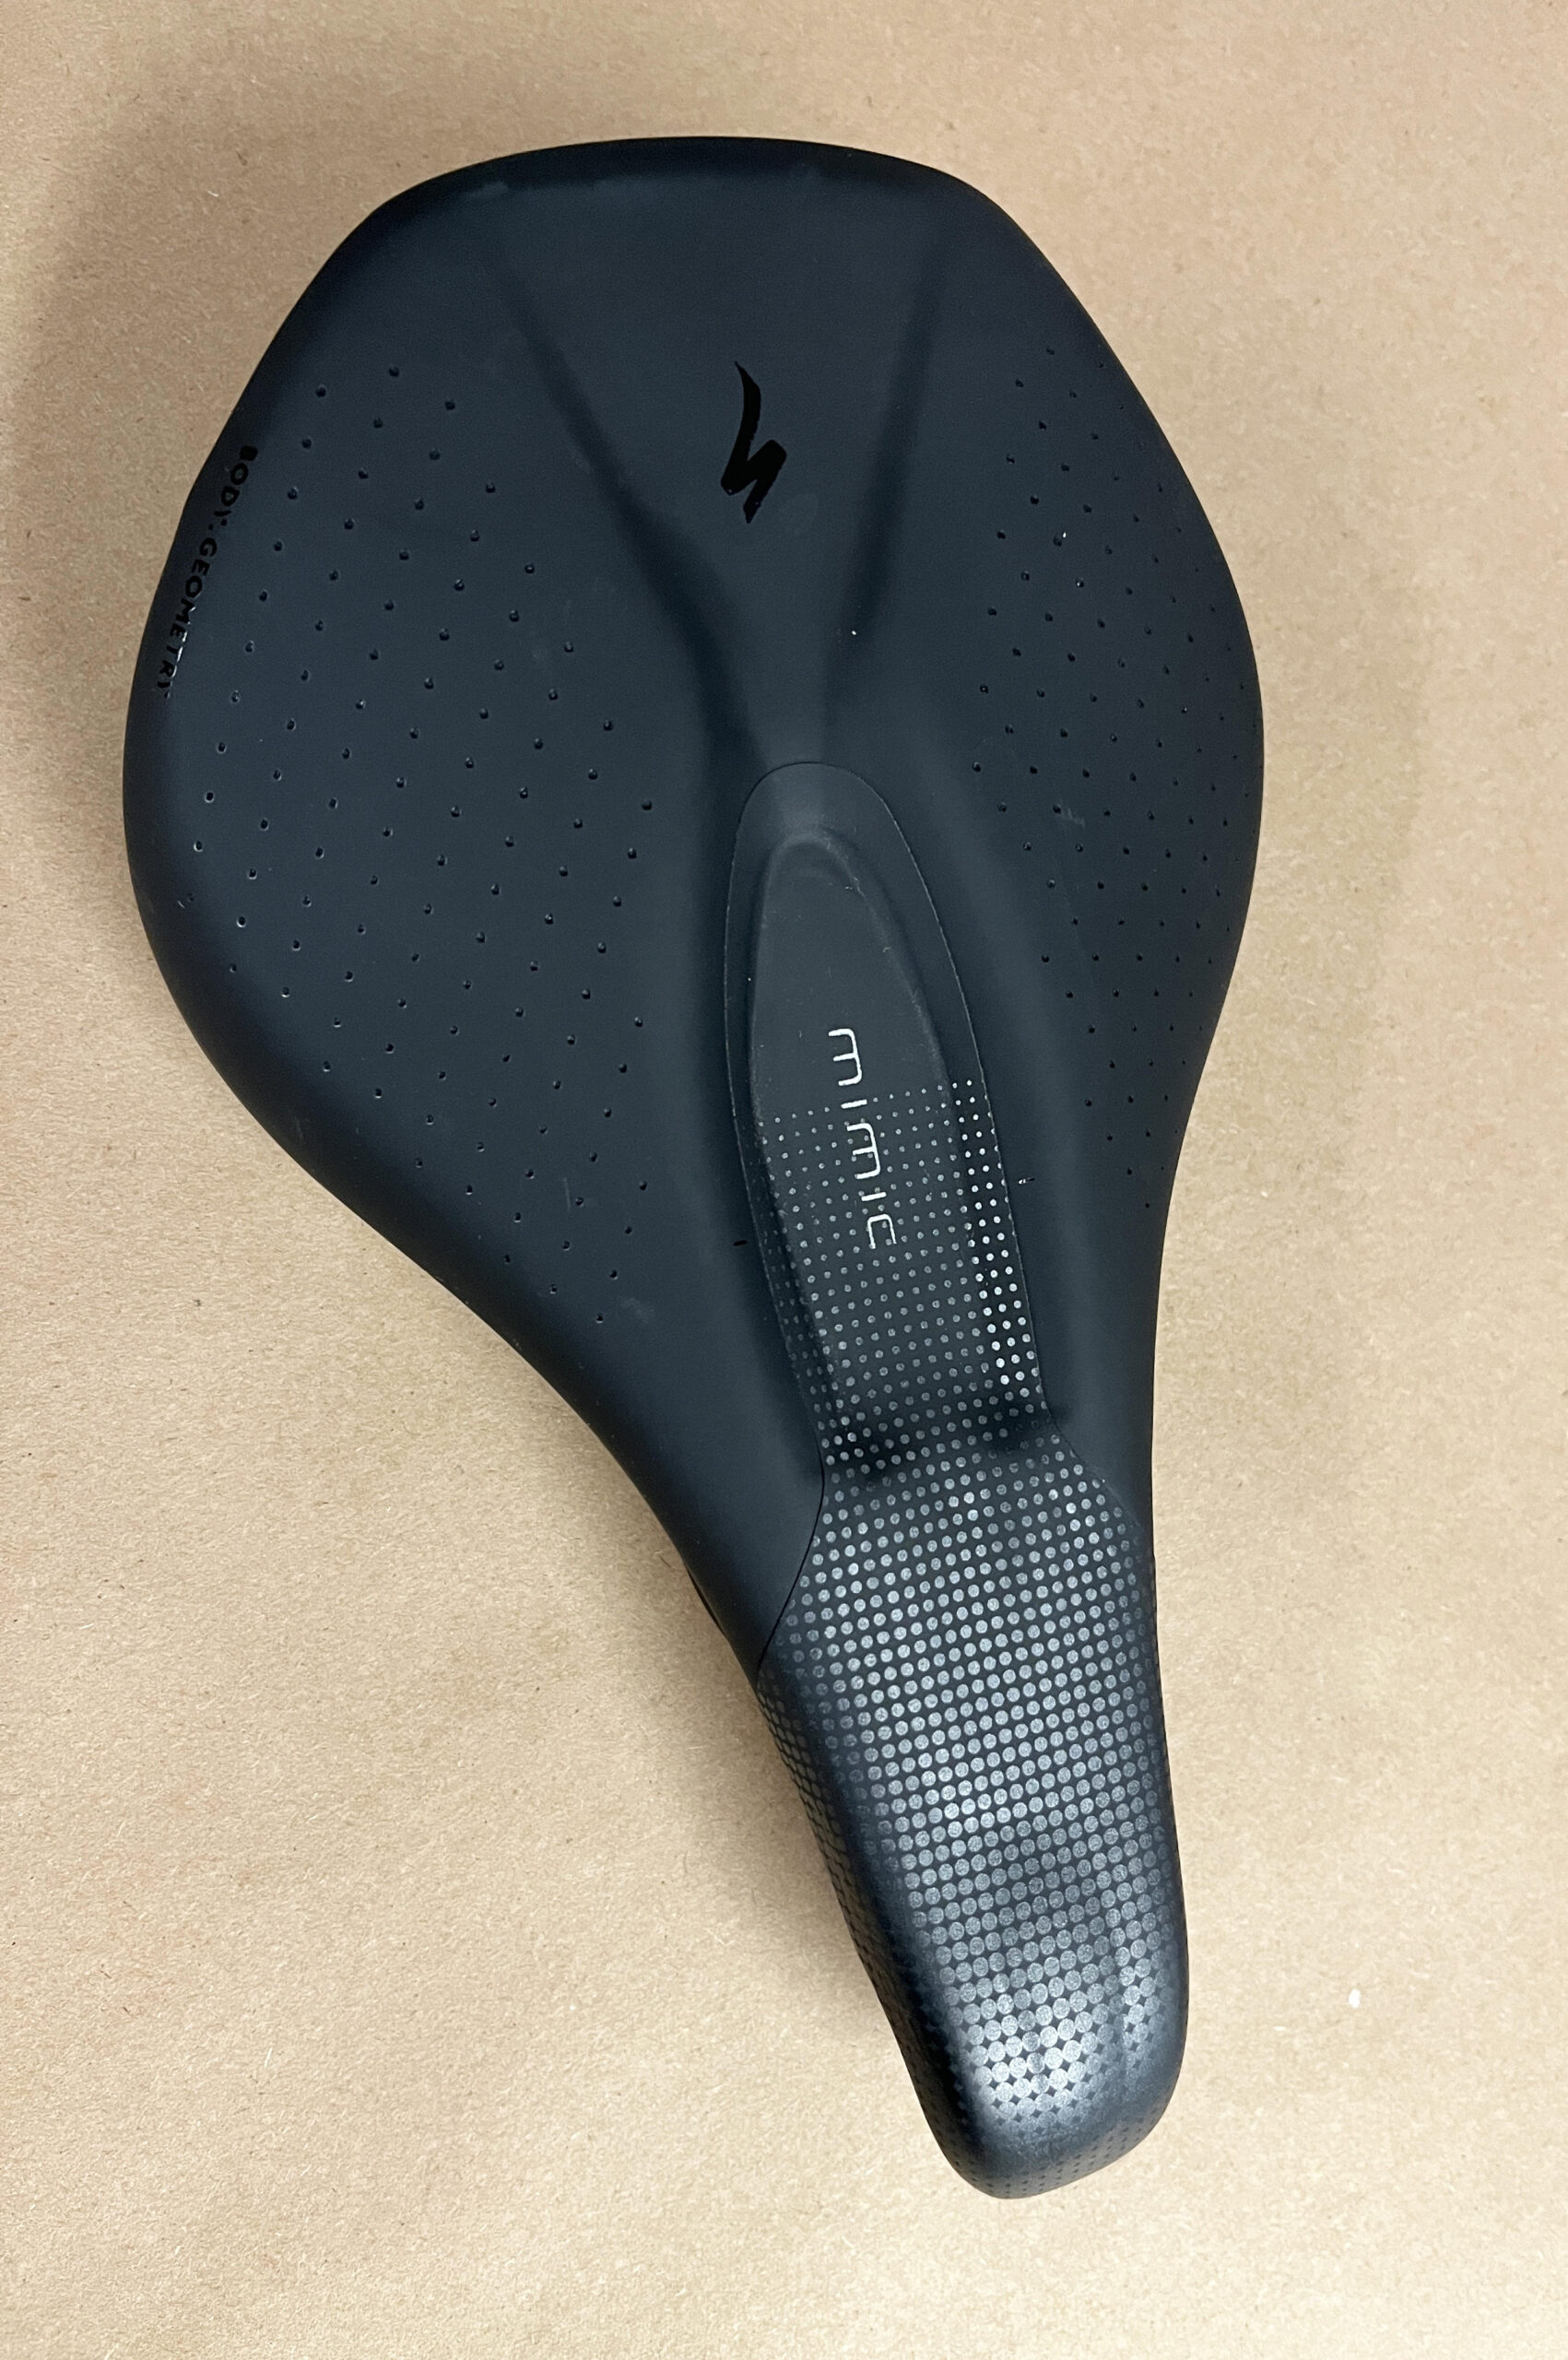 Specialized Power Expert Saddle With Mimic, Black, 143